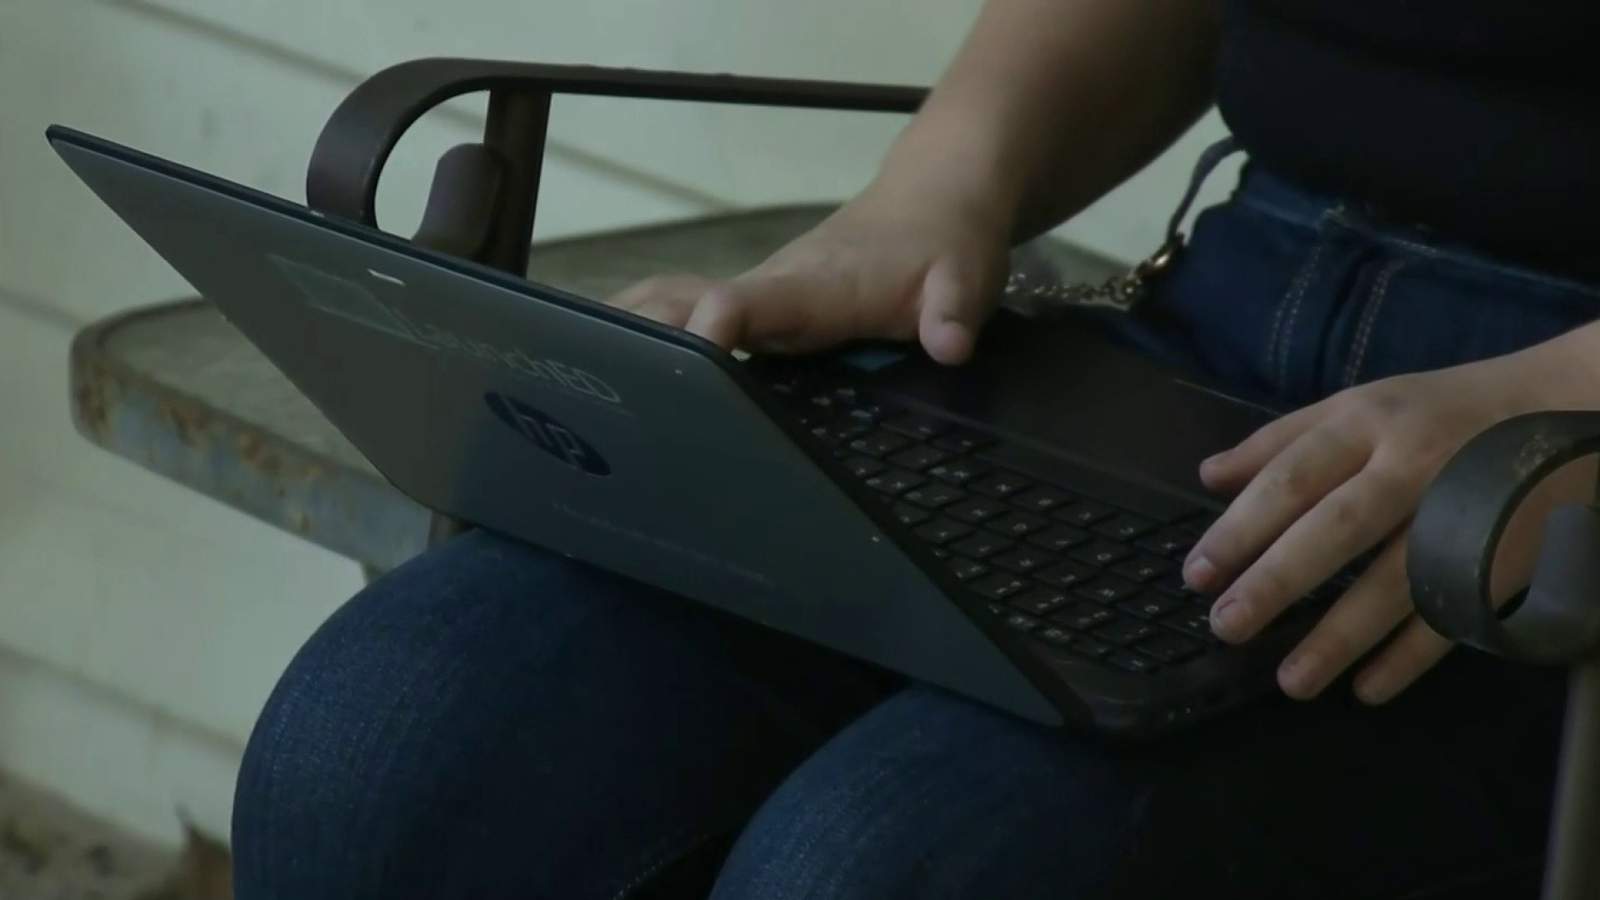 Orange County parents hope for smooth start with virtual learning